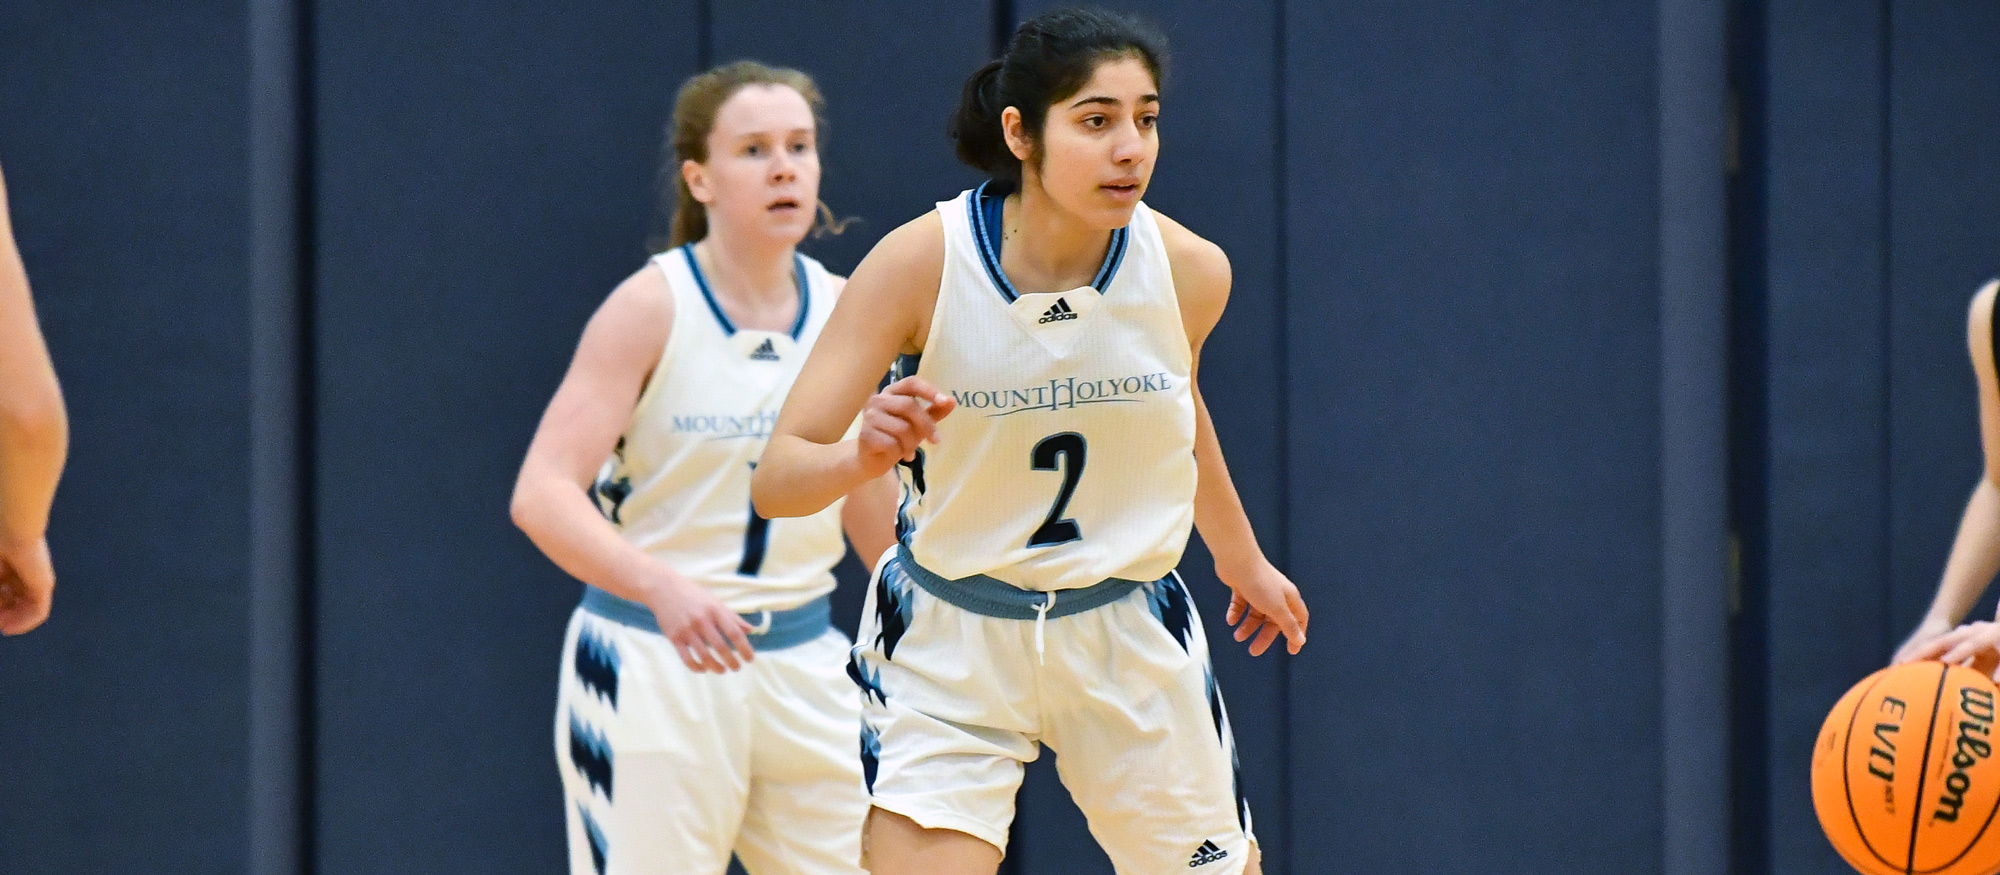 Amrit Khinda drained her first career 3-pointer in Mount Holyoke's season-ending game at Springfield College on Feb. 18, 2023. (RJB Sports file photo)